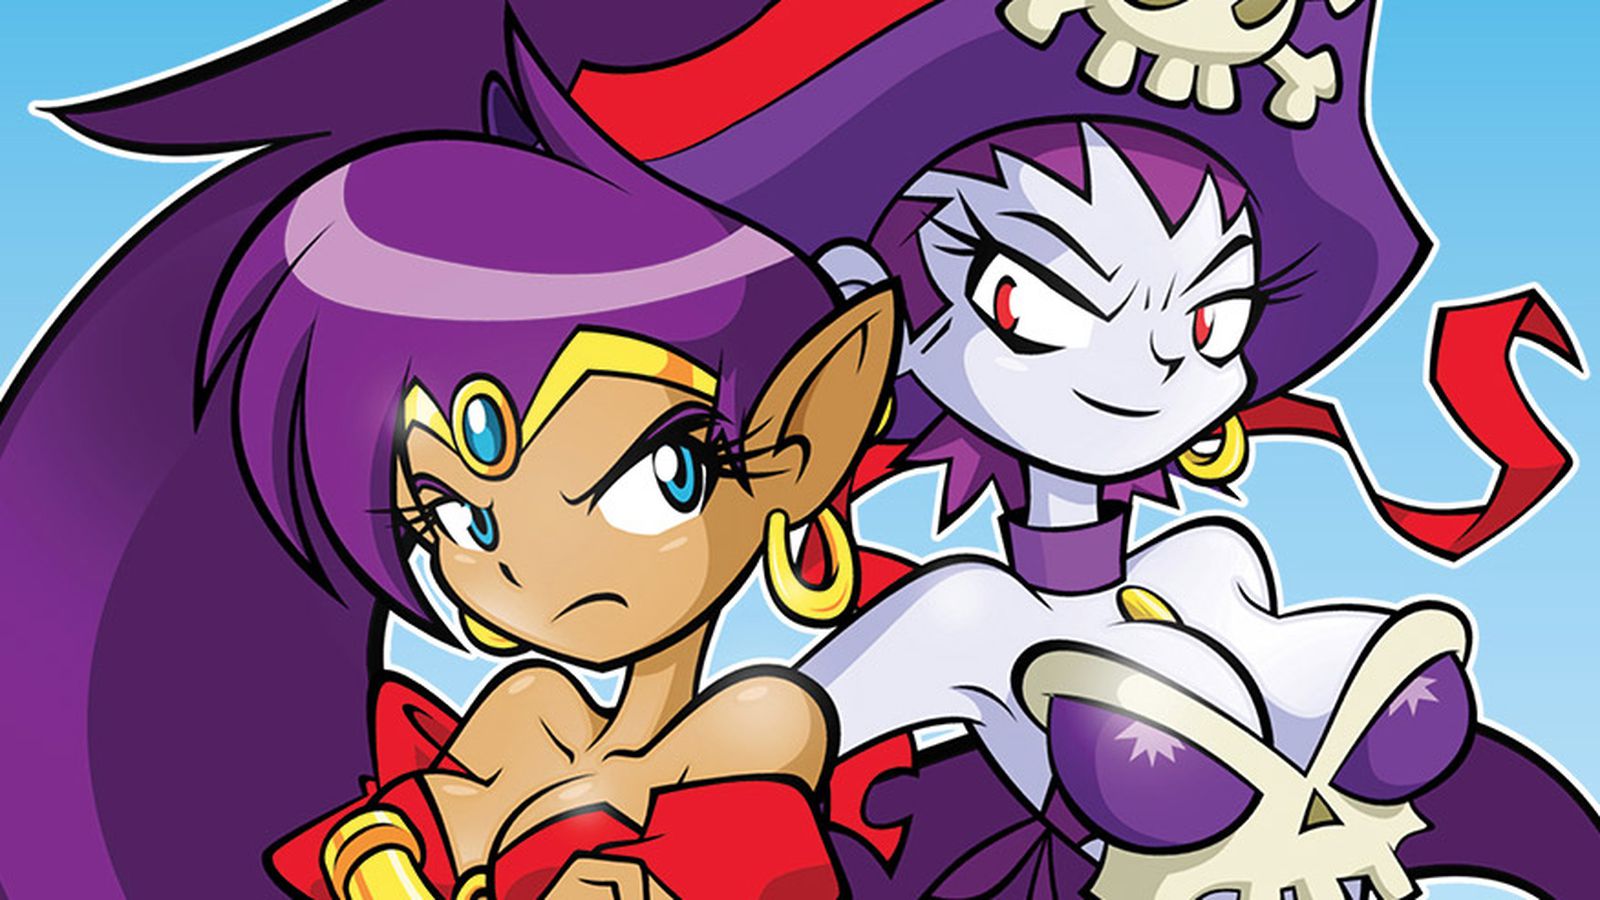 Shantae and the Pirate's Curse coming to Nintendo 3DS eShop in 2013.